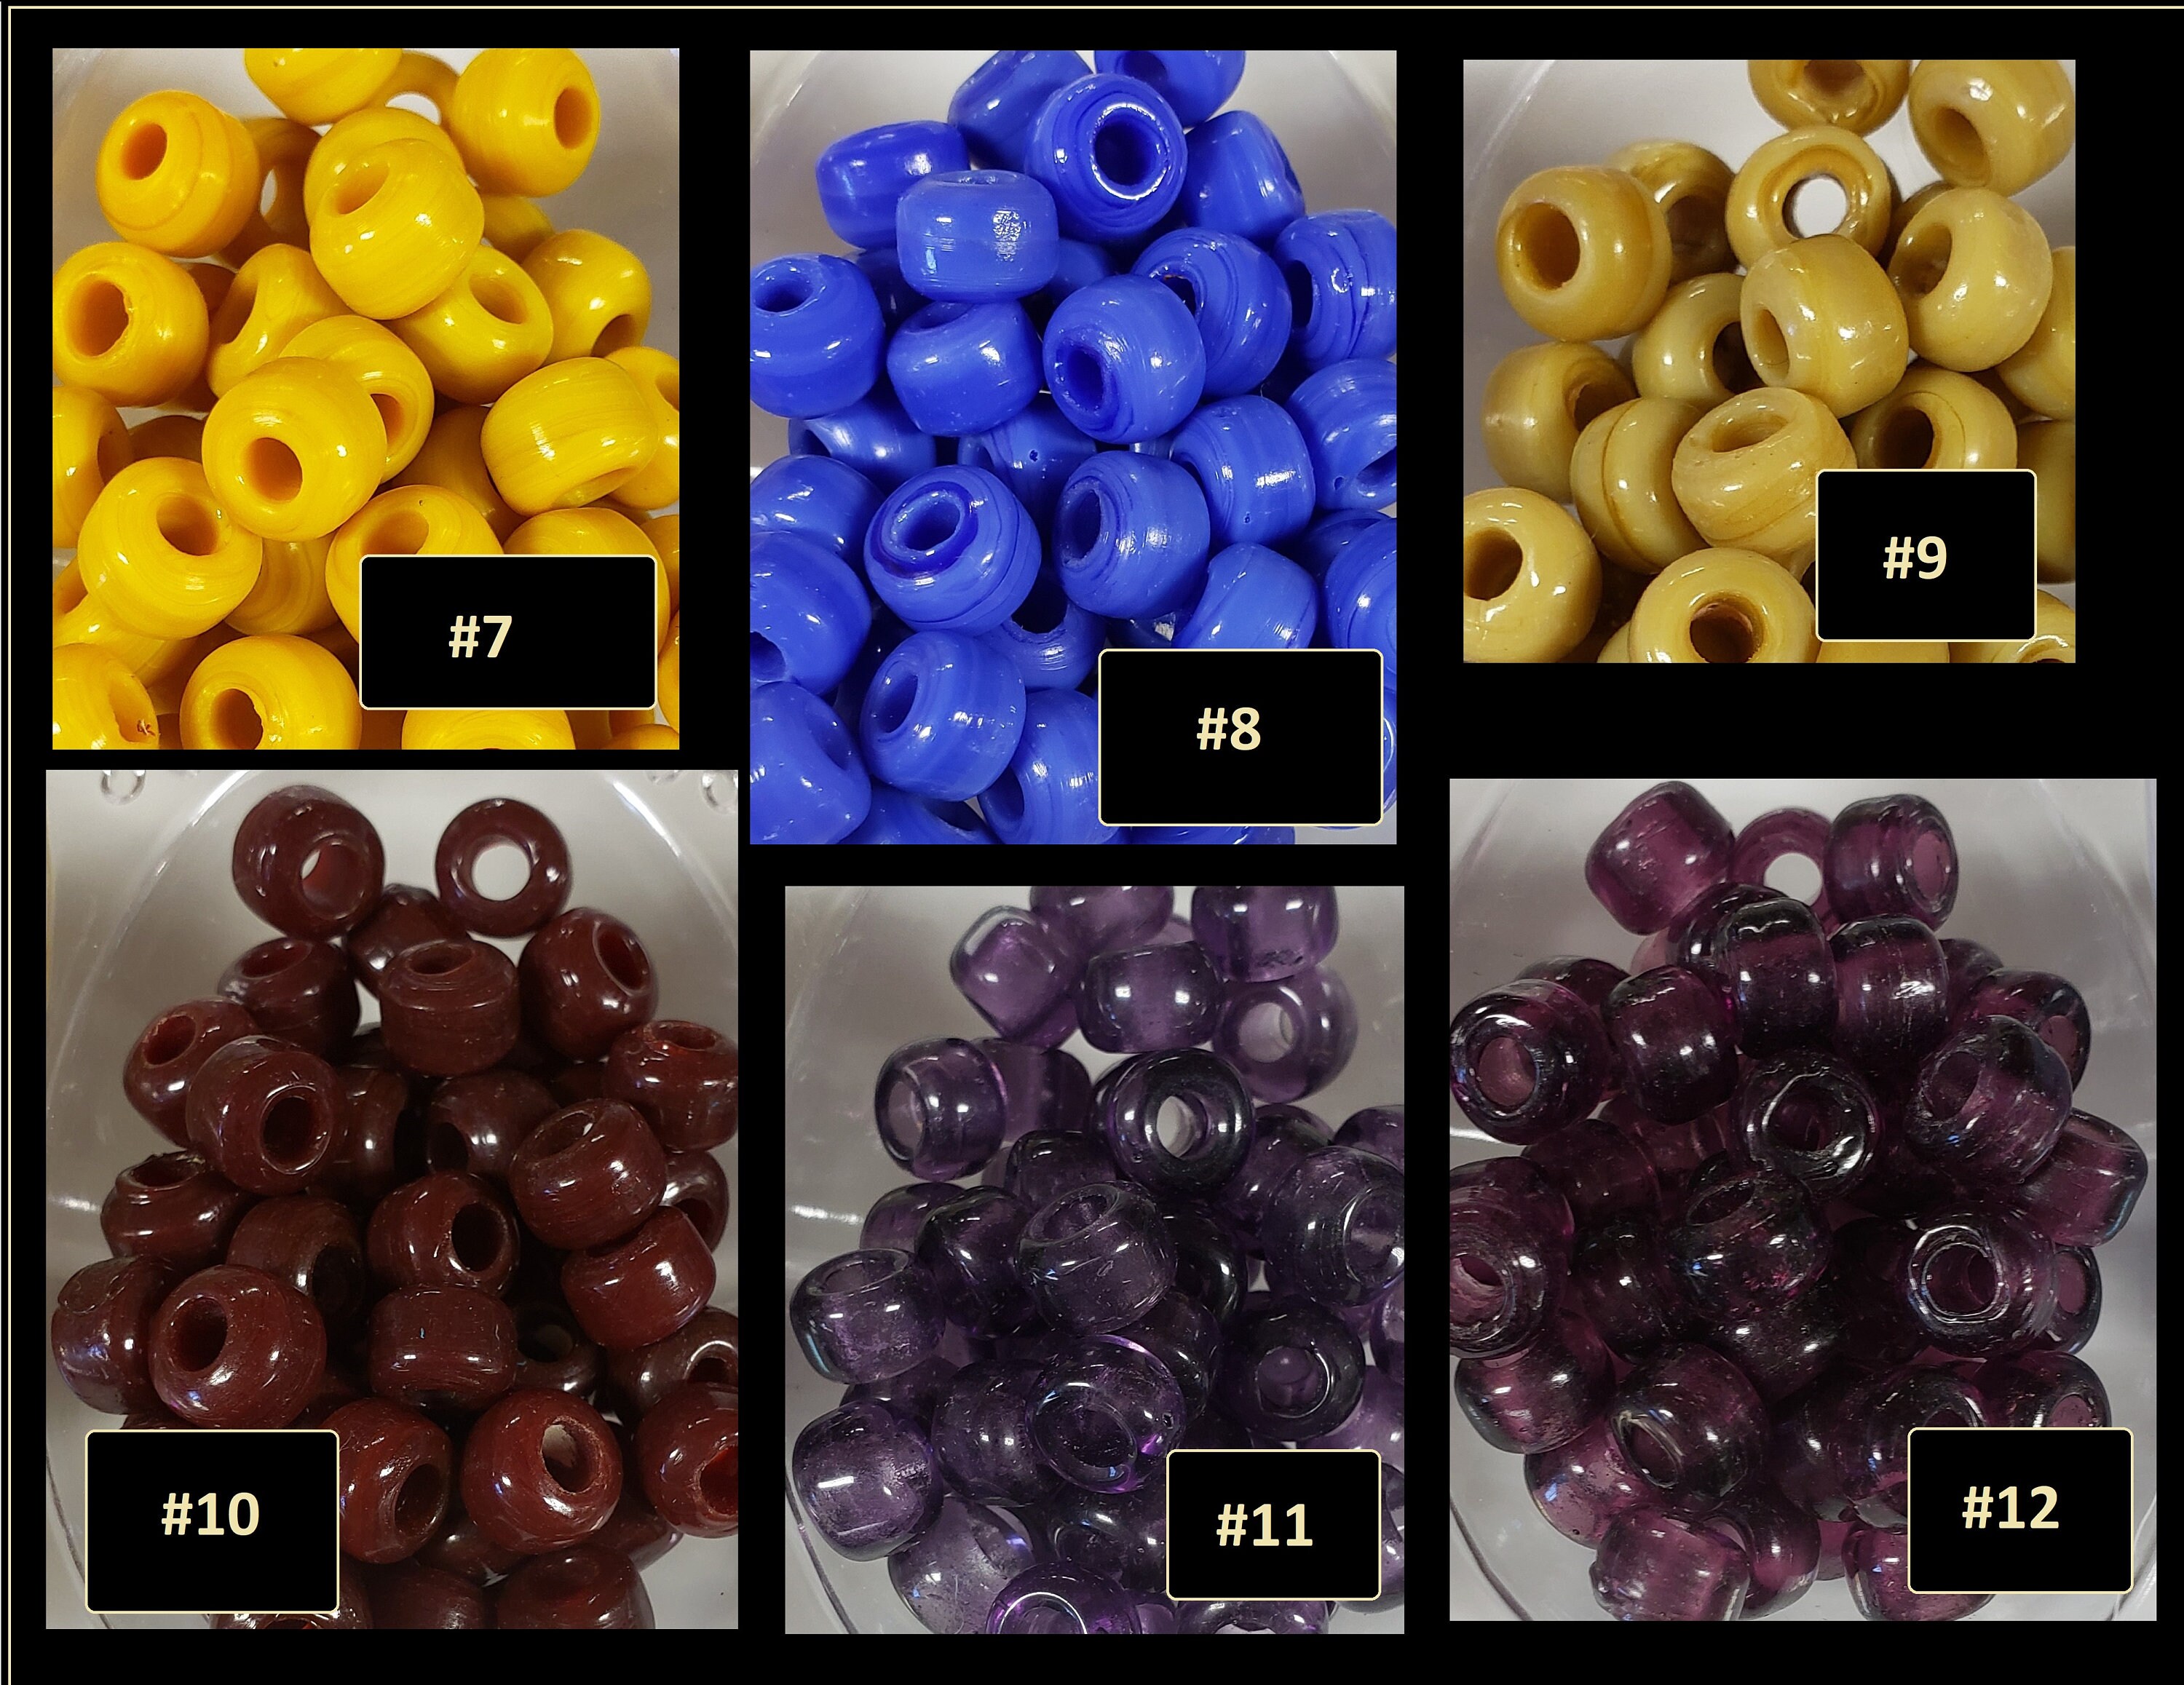 9mm Opaque Red Glass Pony Beads, 100pcs - 112P4D